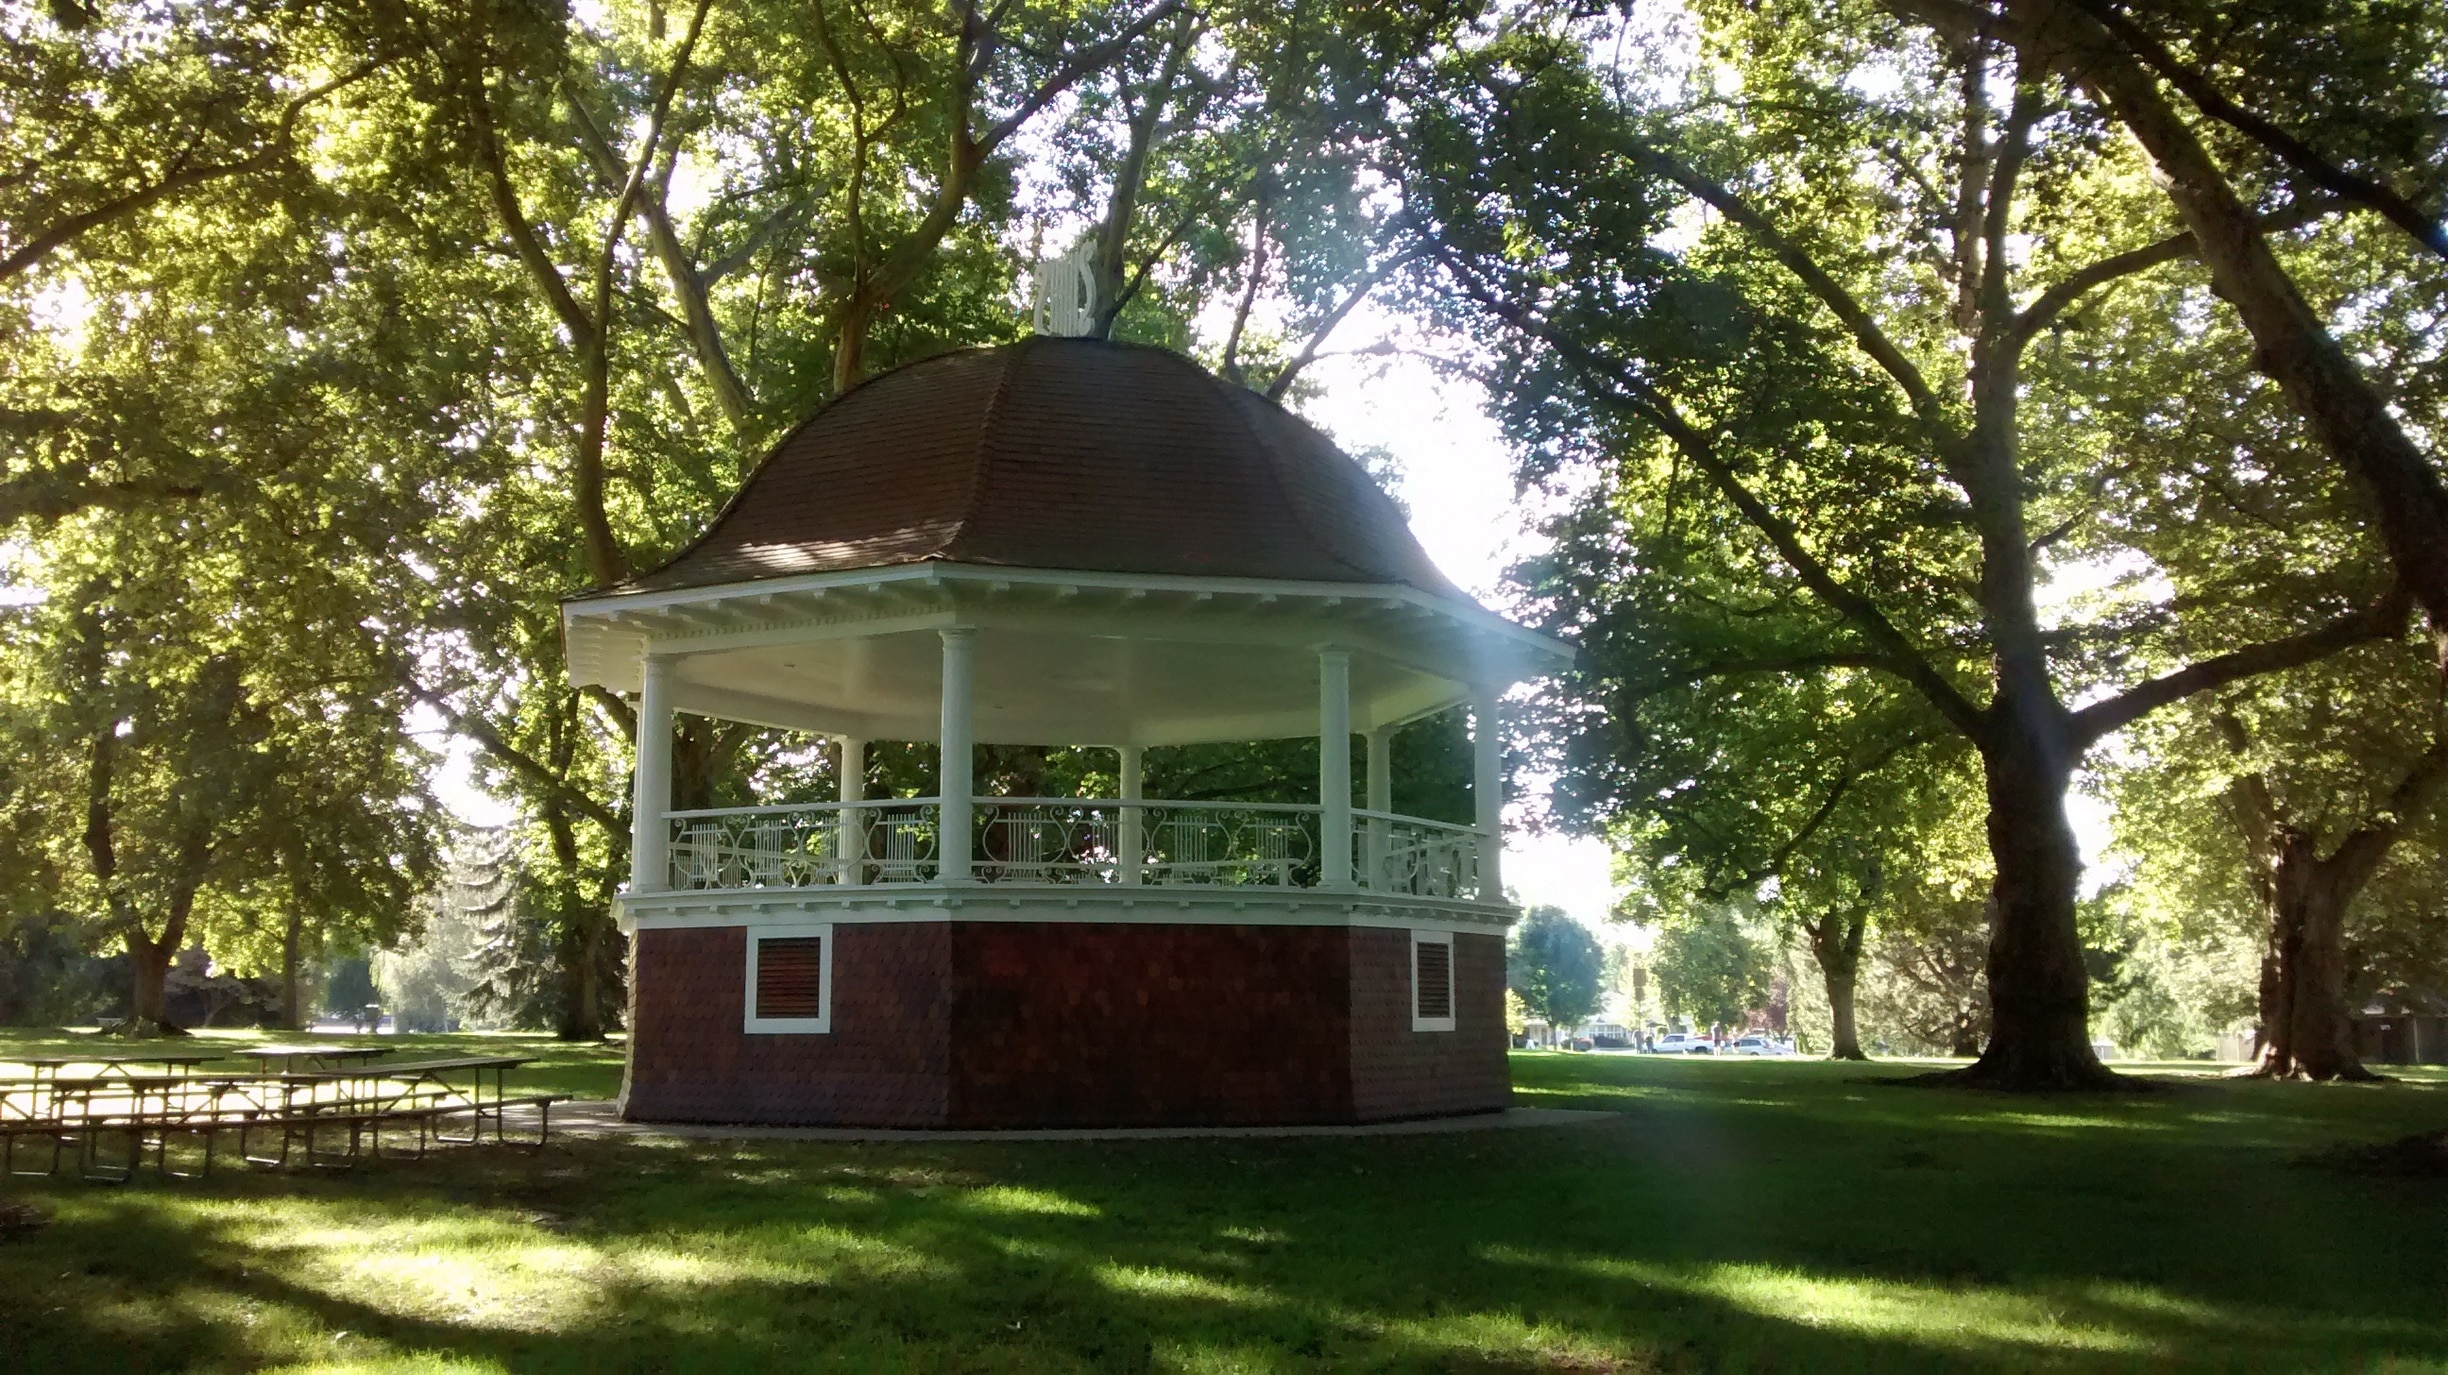 Beautiful morning in Pioneer Park. Established in 1902, it is Walla Walla's oldest park. Enjoy outdoor concerts performed in the bandstand, and watch the squirrels at play as you sit under the canopy of the 100+ year old giant sycamore trees.